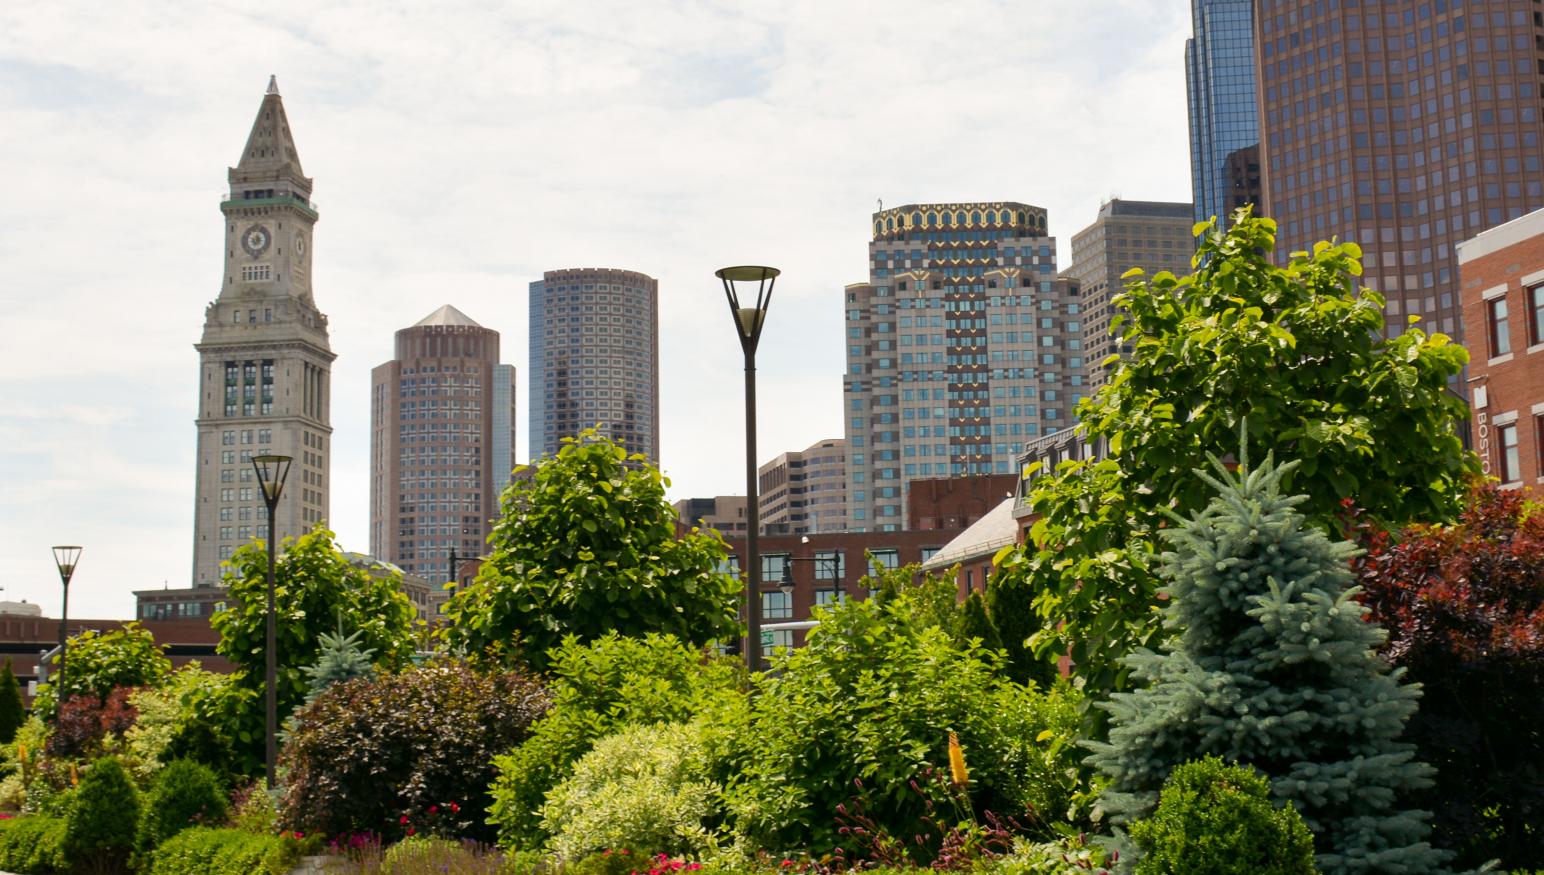 A few iconic Boston buildings pictured behind a garden